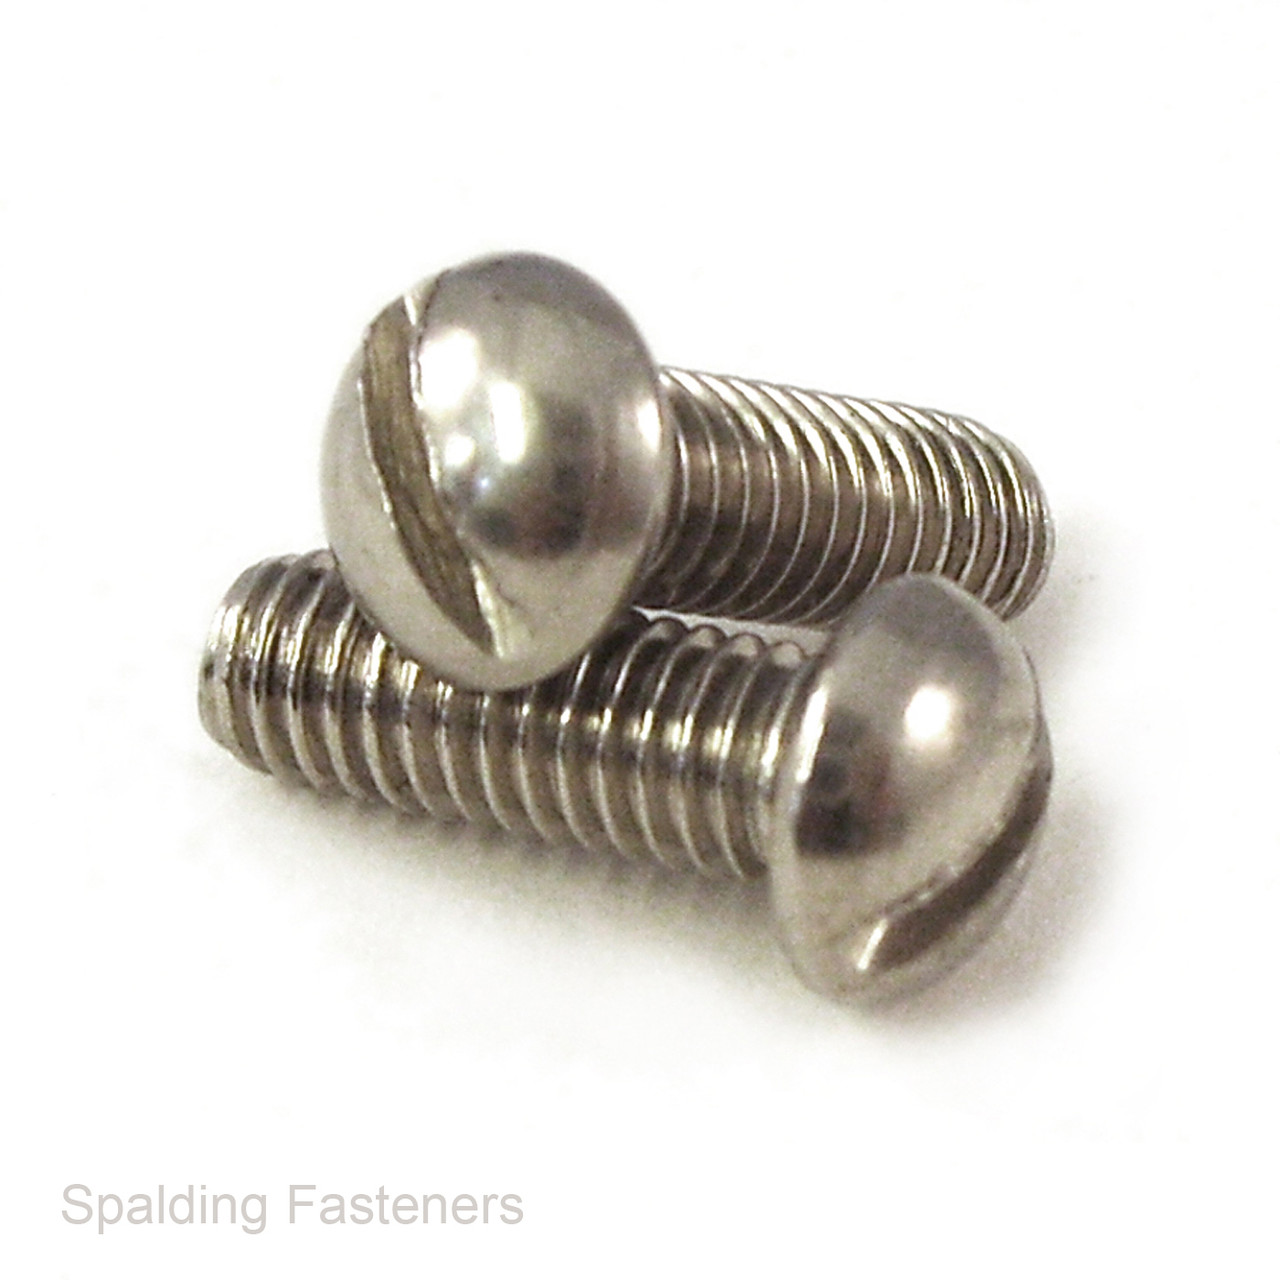 10-24 UNC A2 Grade Stainless Steel Round Slotted Machine Screws